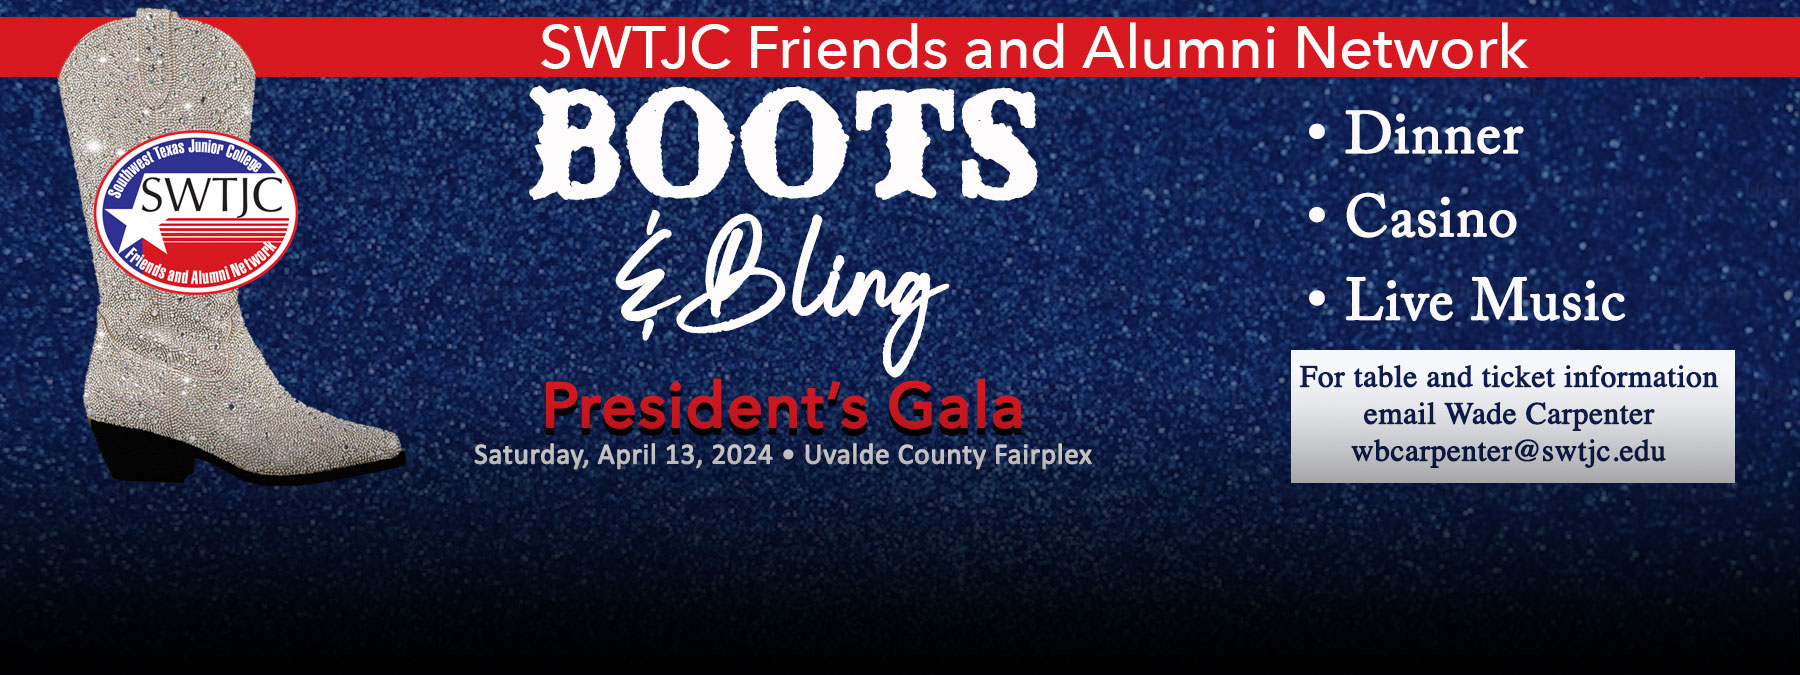 Gala on Saturday, April 13th, at the Uvalde County Fairplex.This year's theme is "Boots & Bling." The Gala will begin at 6 p.m. with a welcome reception, followed by dinner, live music, dancing, a silent auction, and casino entertainment at 7 p.m.